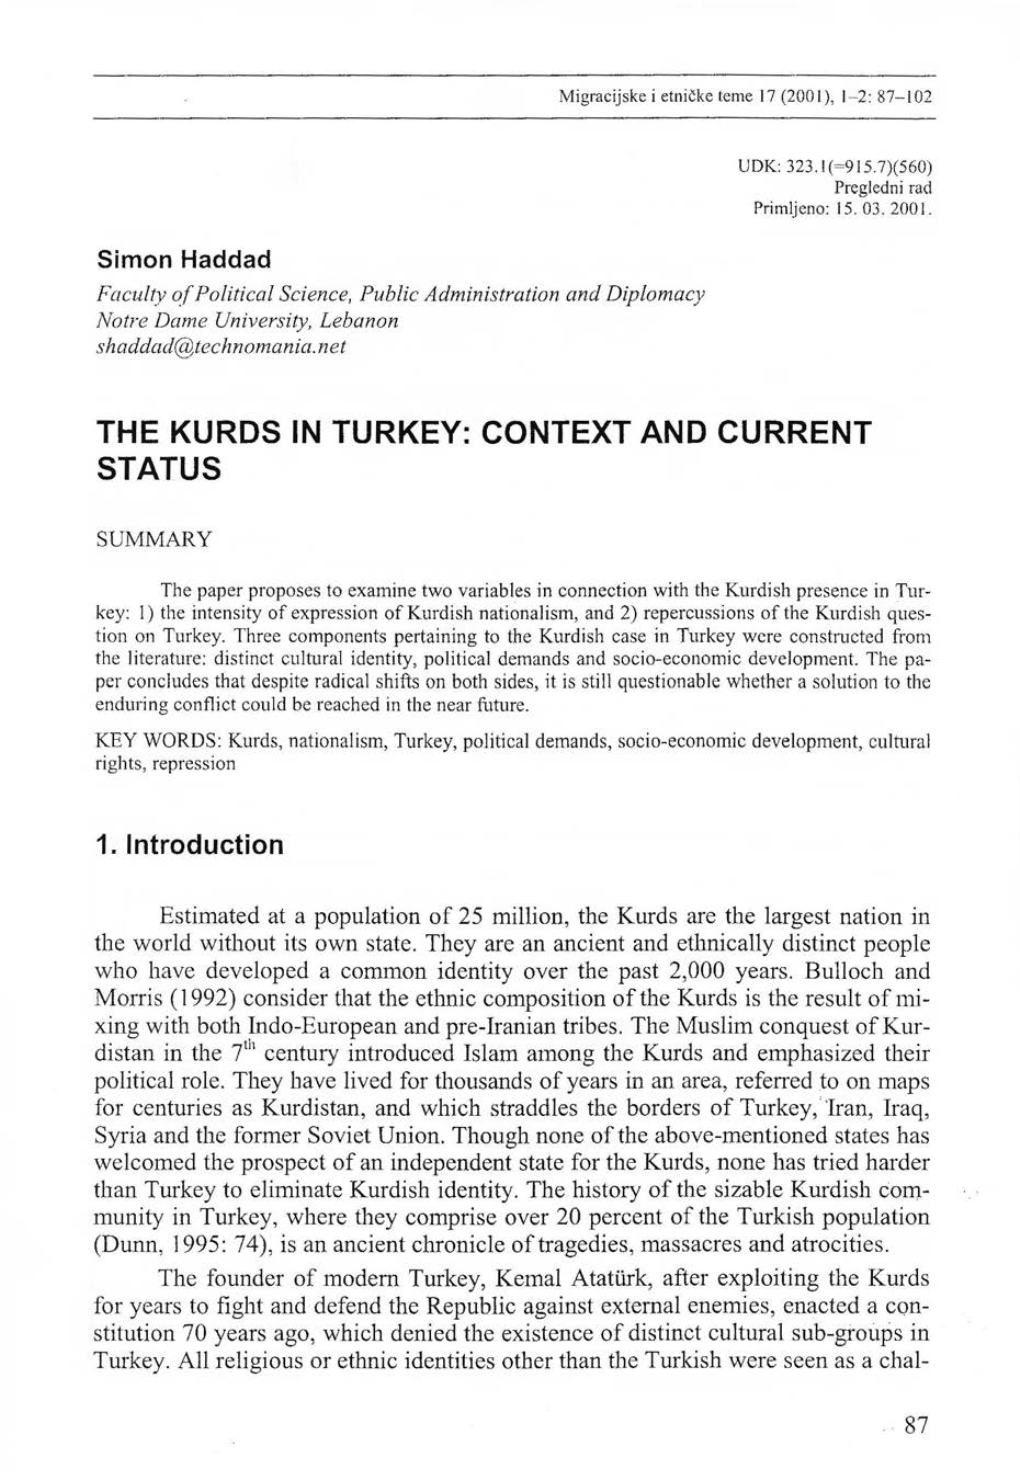 The Kurds in Turkey: Context and Current Status